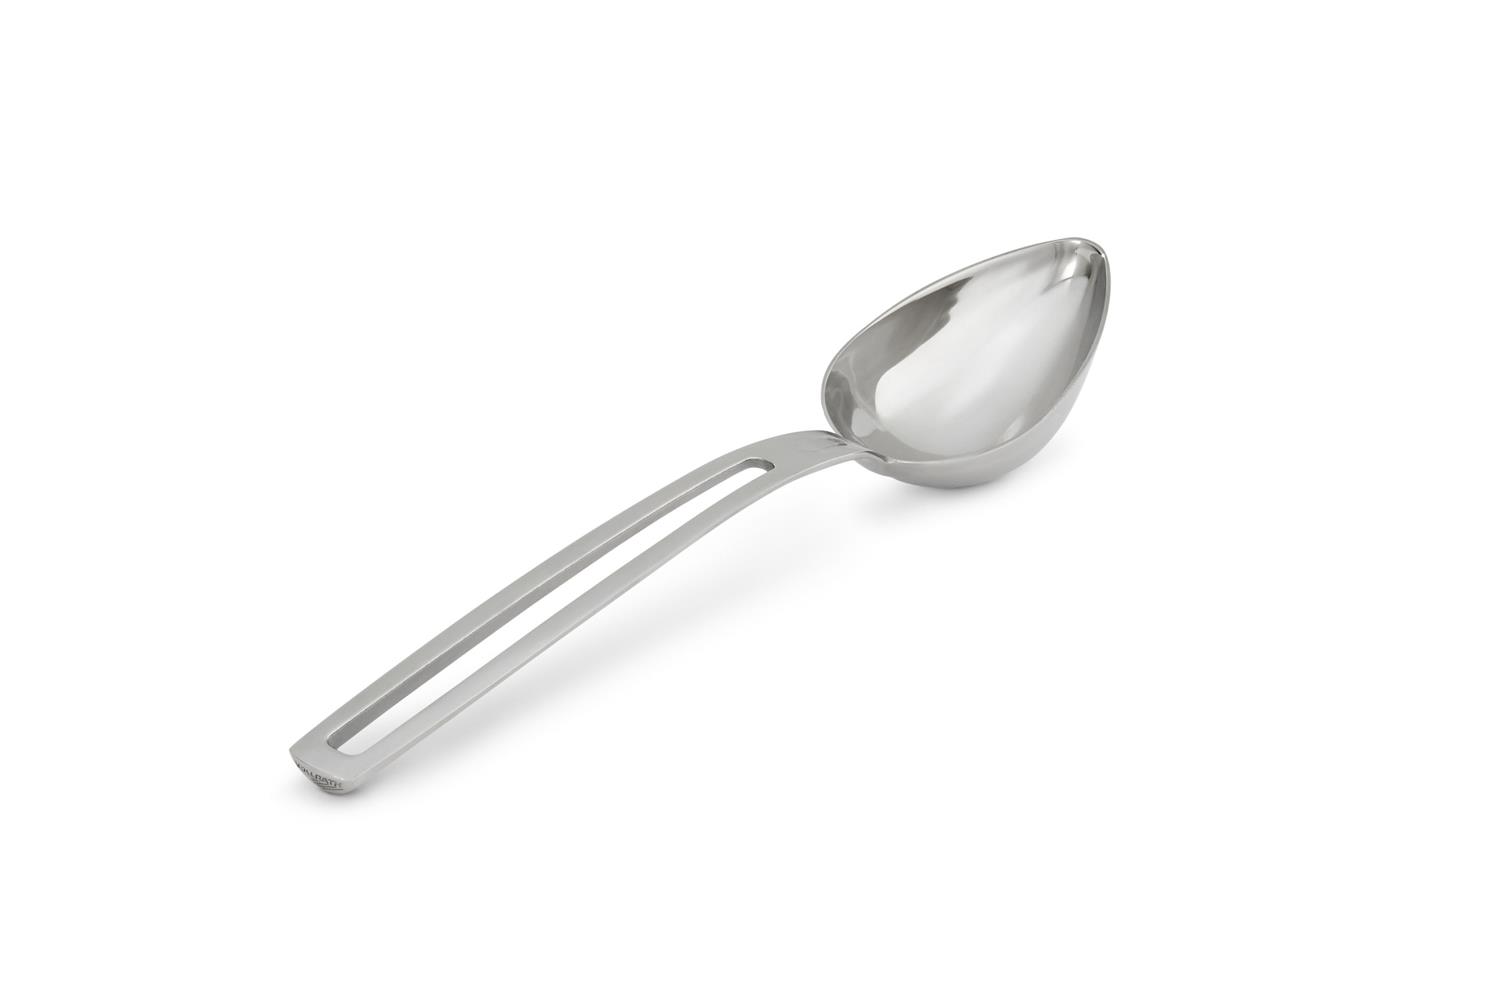 Vollrath 46722 Oval Serving Spoon, Solid Bowl, 2.7 oz